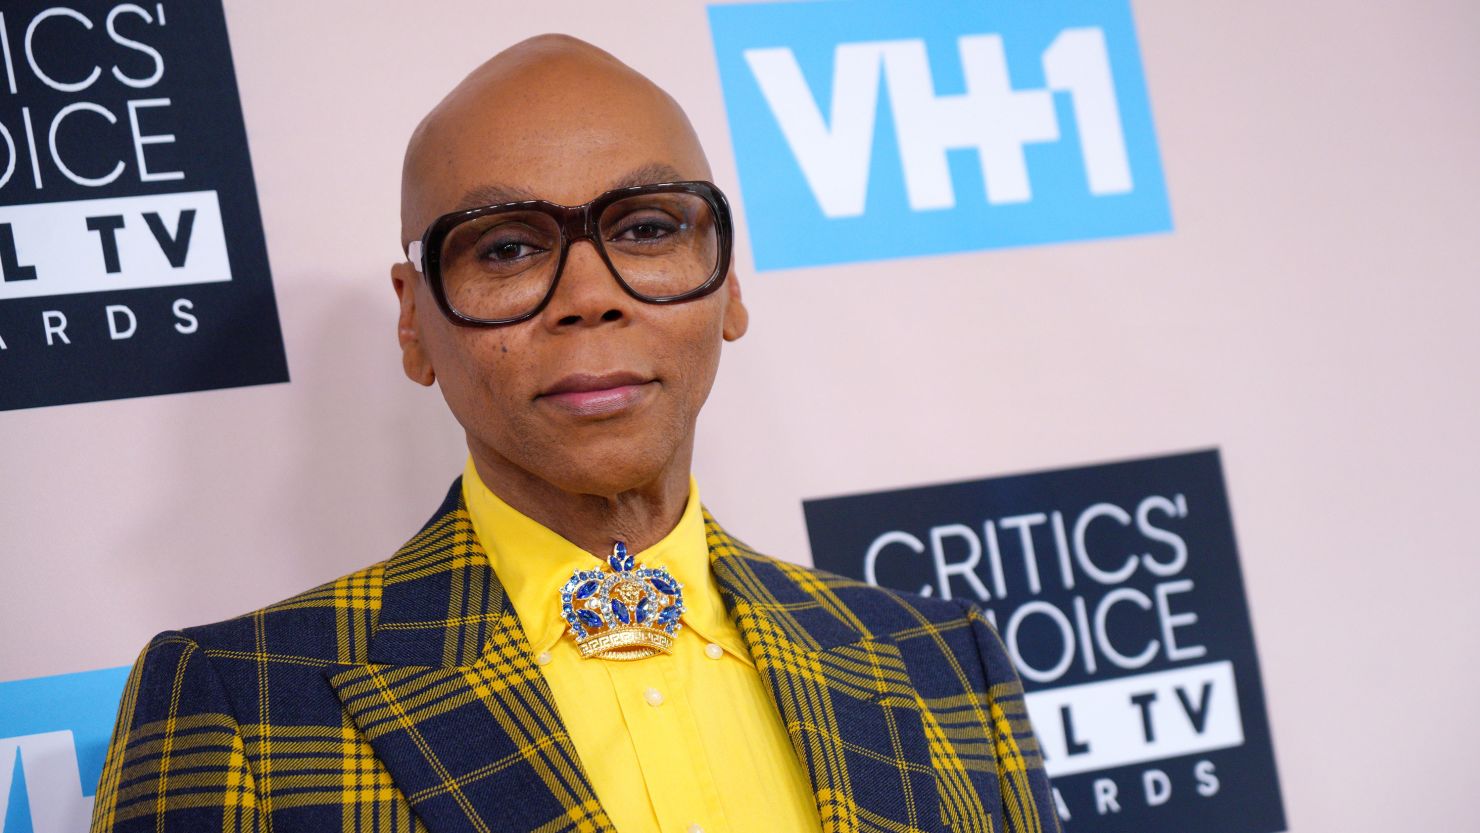 RuPaul, seen here in 2019 in Beverly Hills, California, is speaking out in response to legislation throughout the country looking to restrict or prohibit drag show performances.